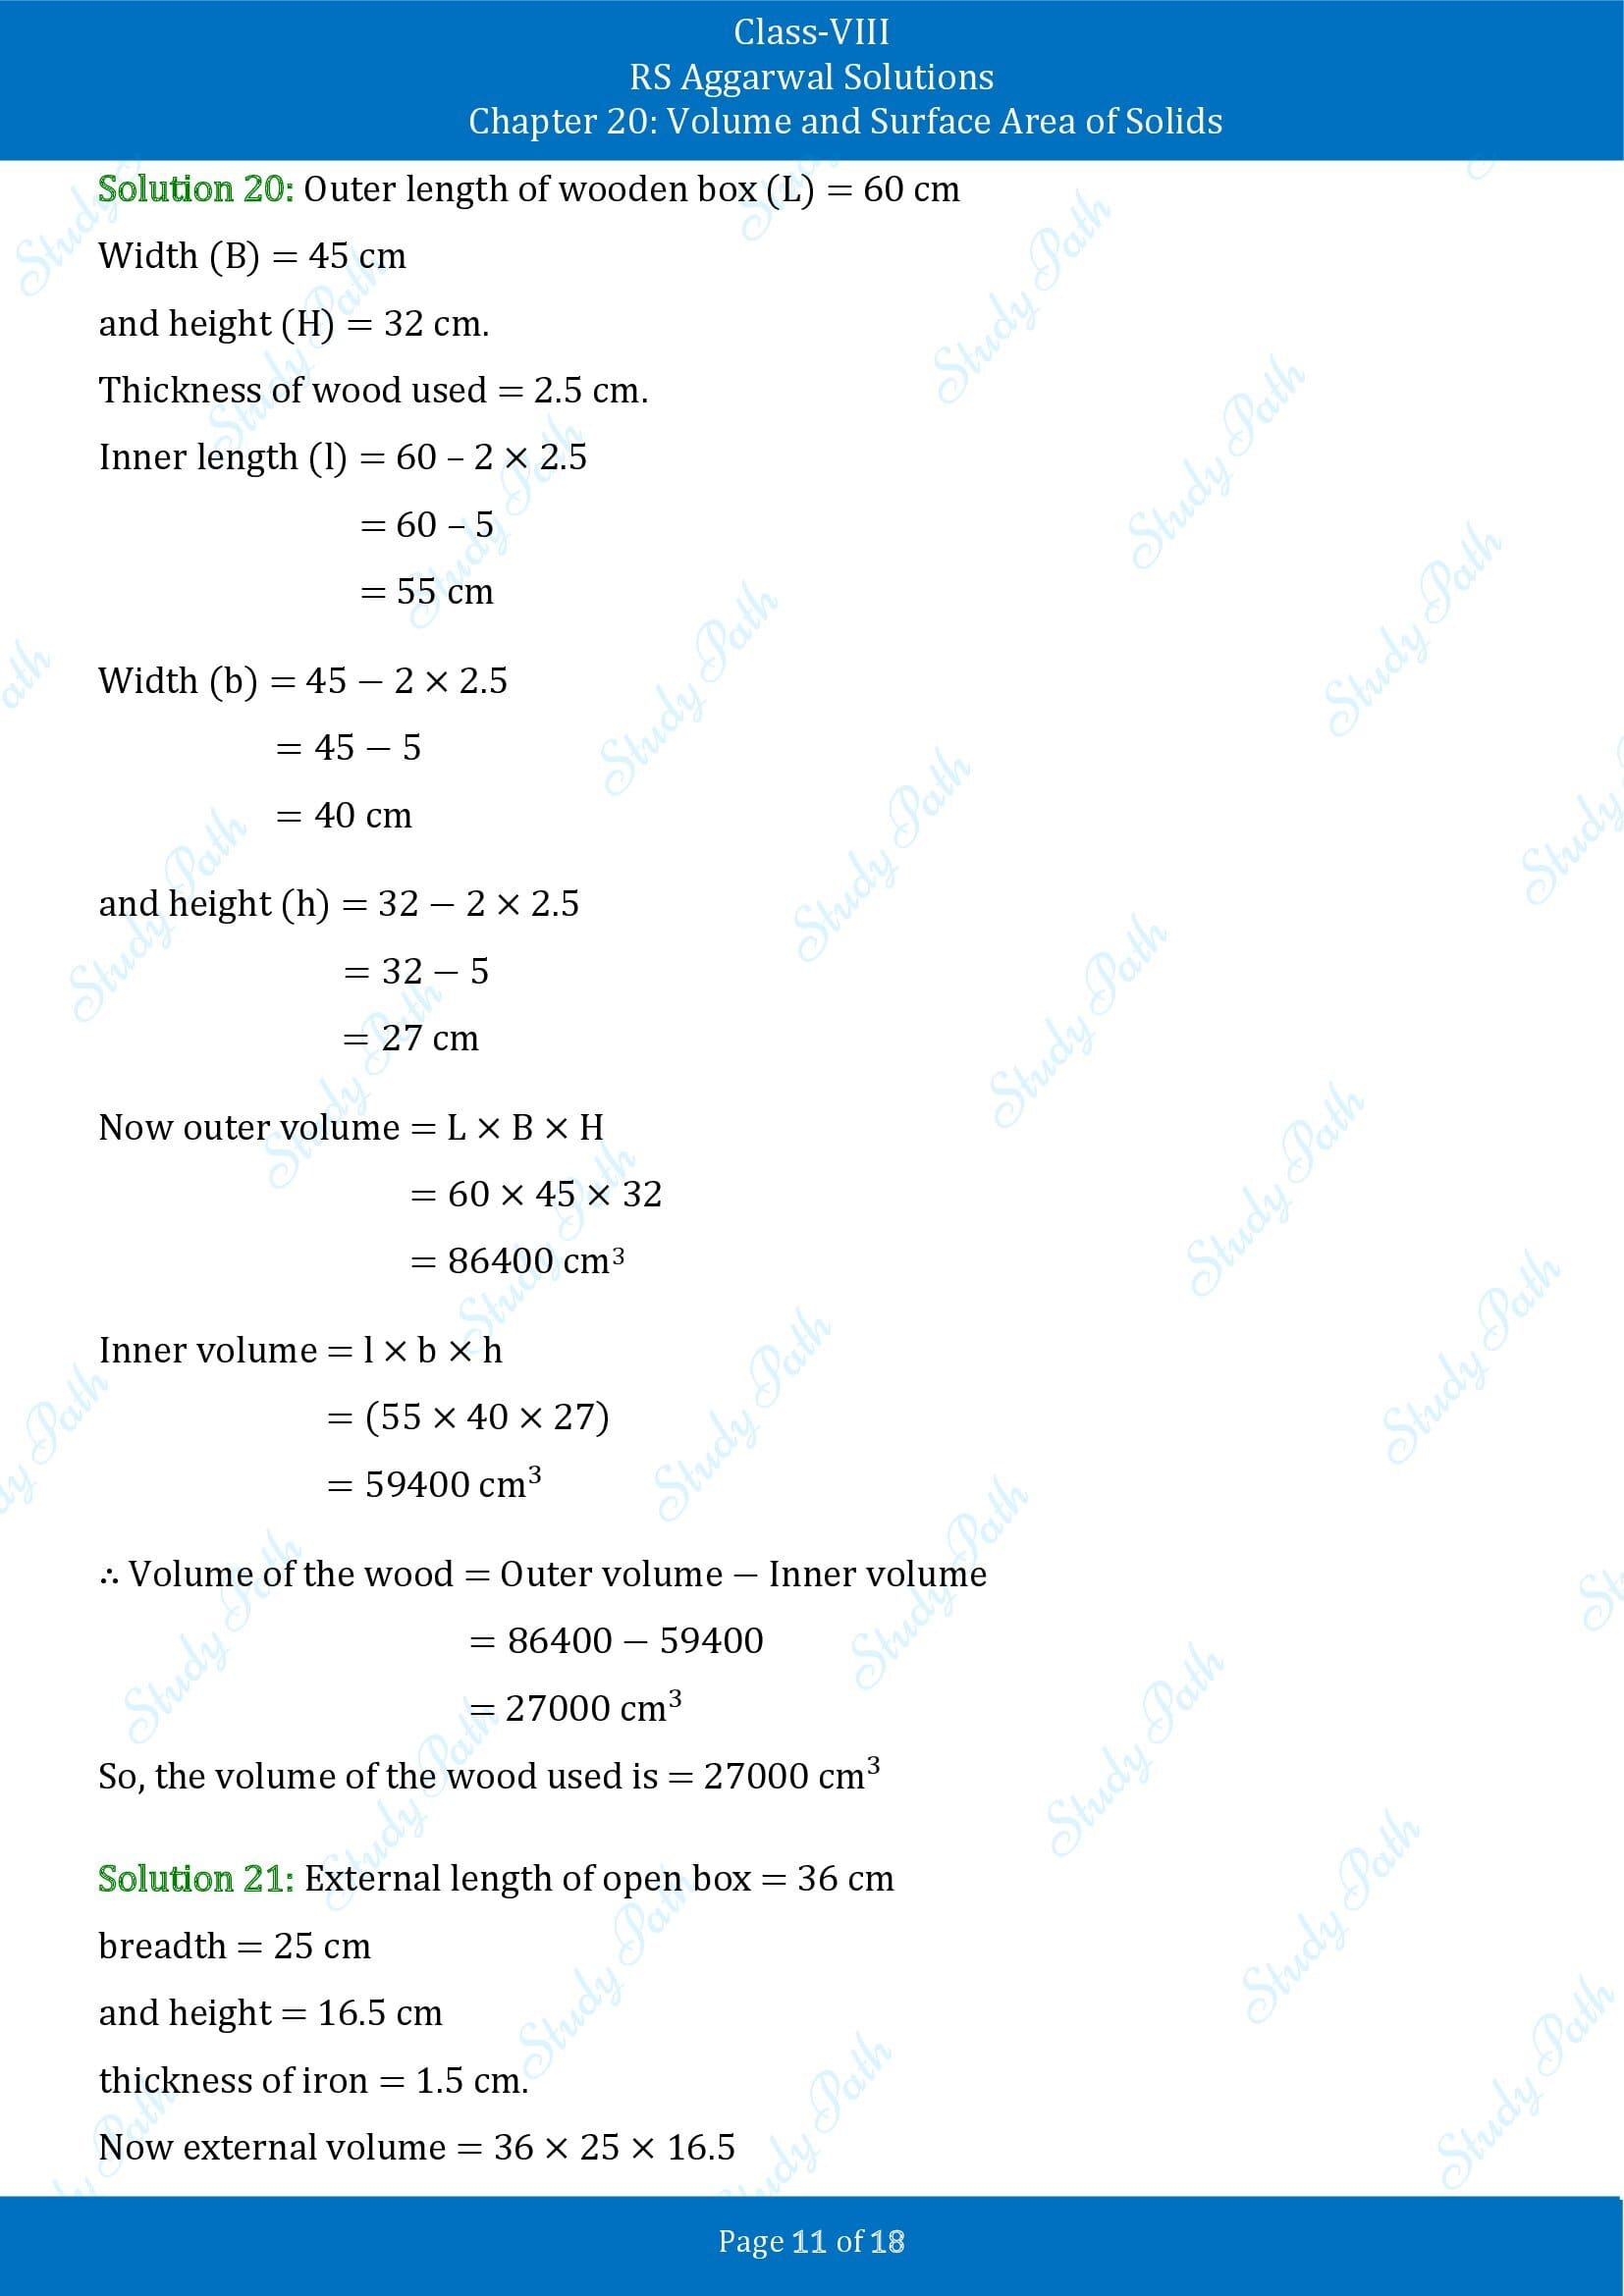 RS Aggarwal Solutions Class 8 Chapter 20 Volume and Surface Area of Solids Exercise 20A 00011